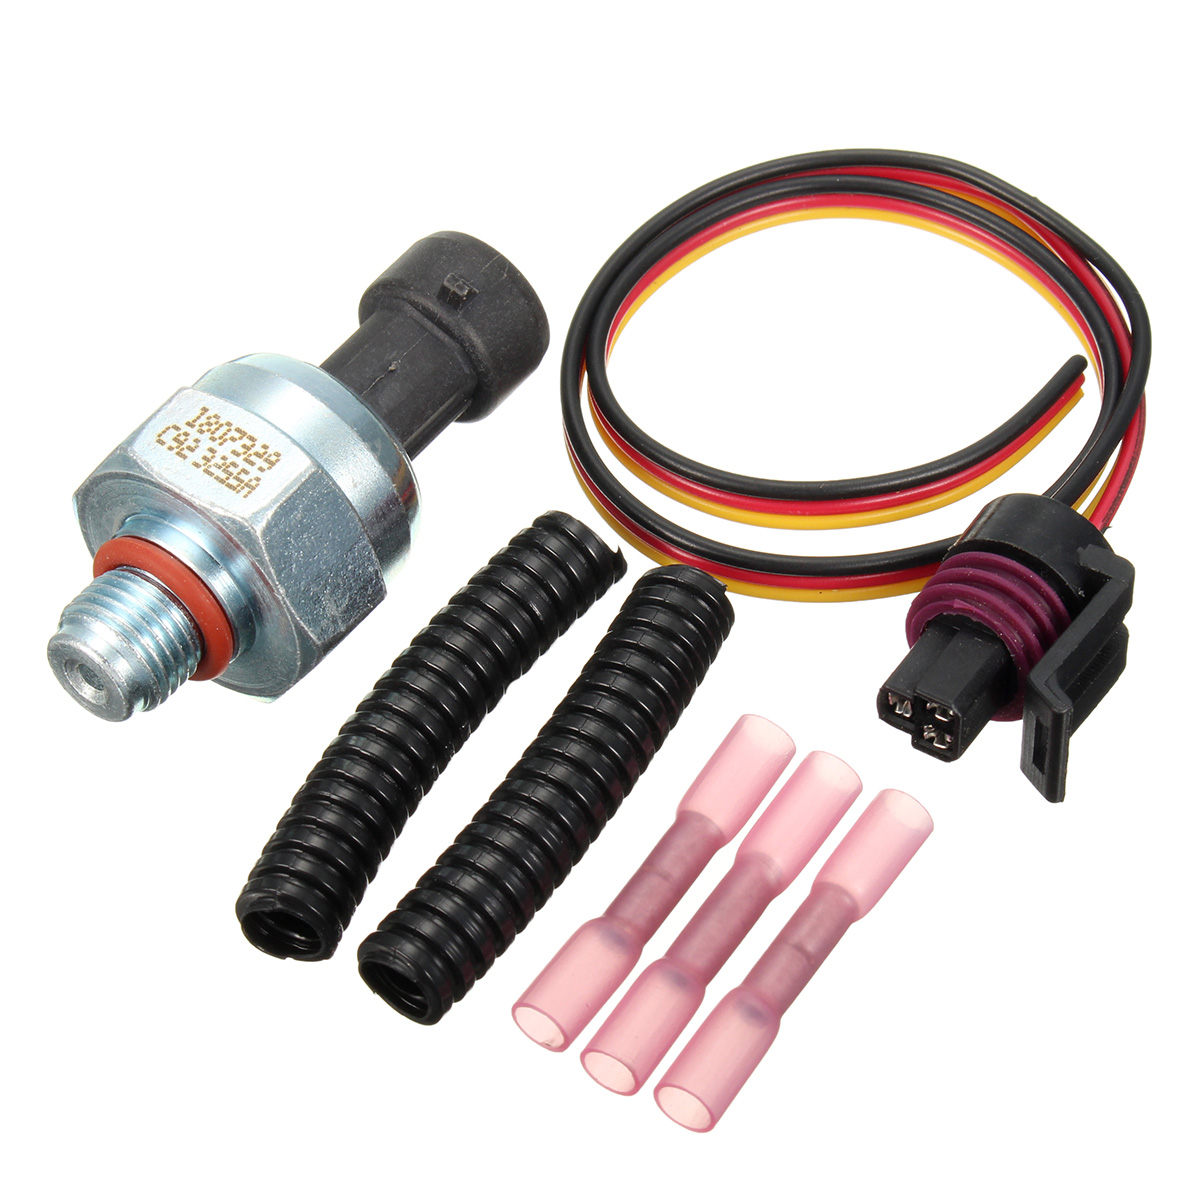 Powerstroke-Oil-Injection-Control-Pressure-Sensor-With-Connector-Kit-For-Ford-E-350-450-550-F750-1373350-1